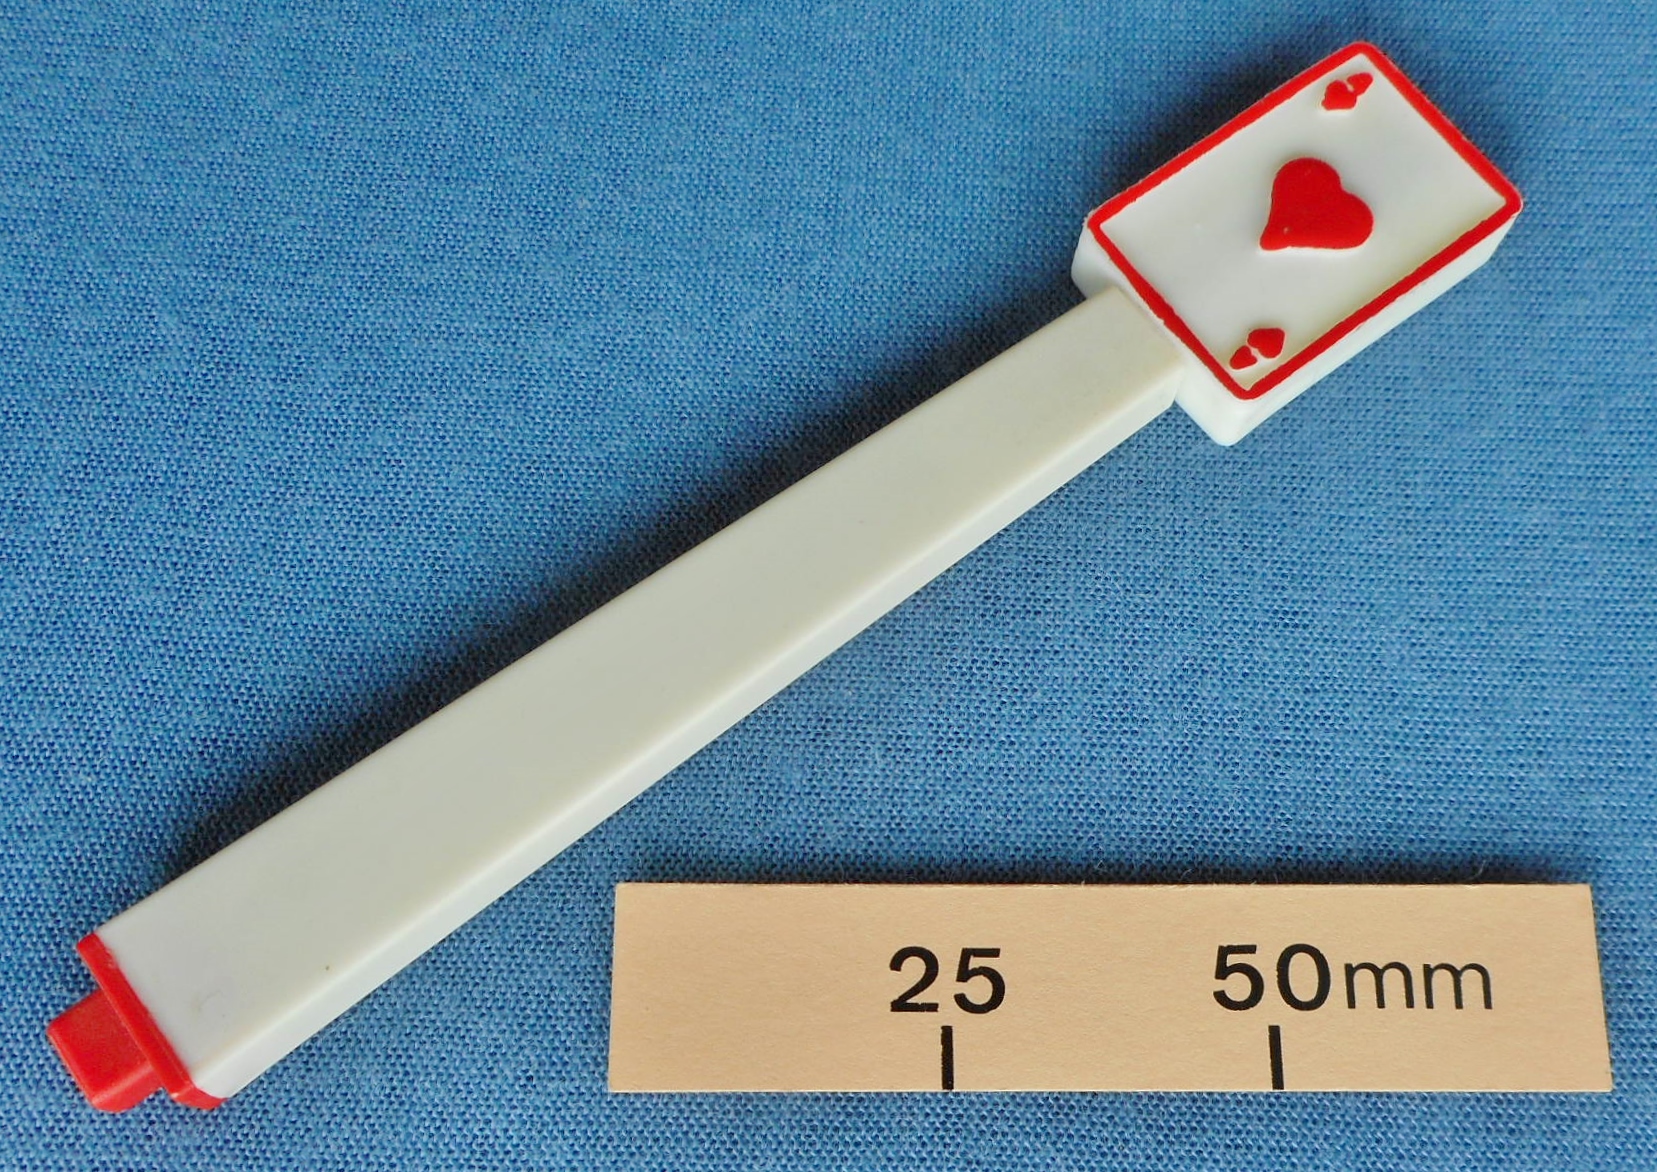 Ace of Hearts ball point pen